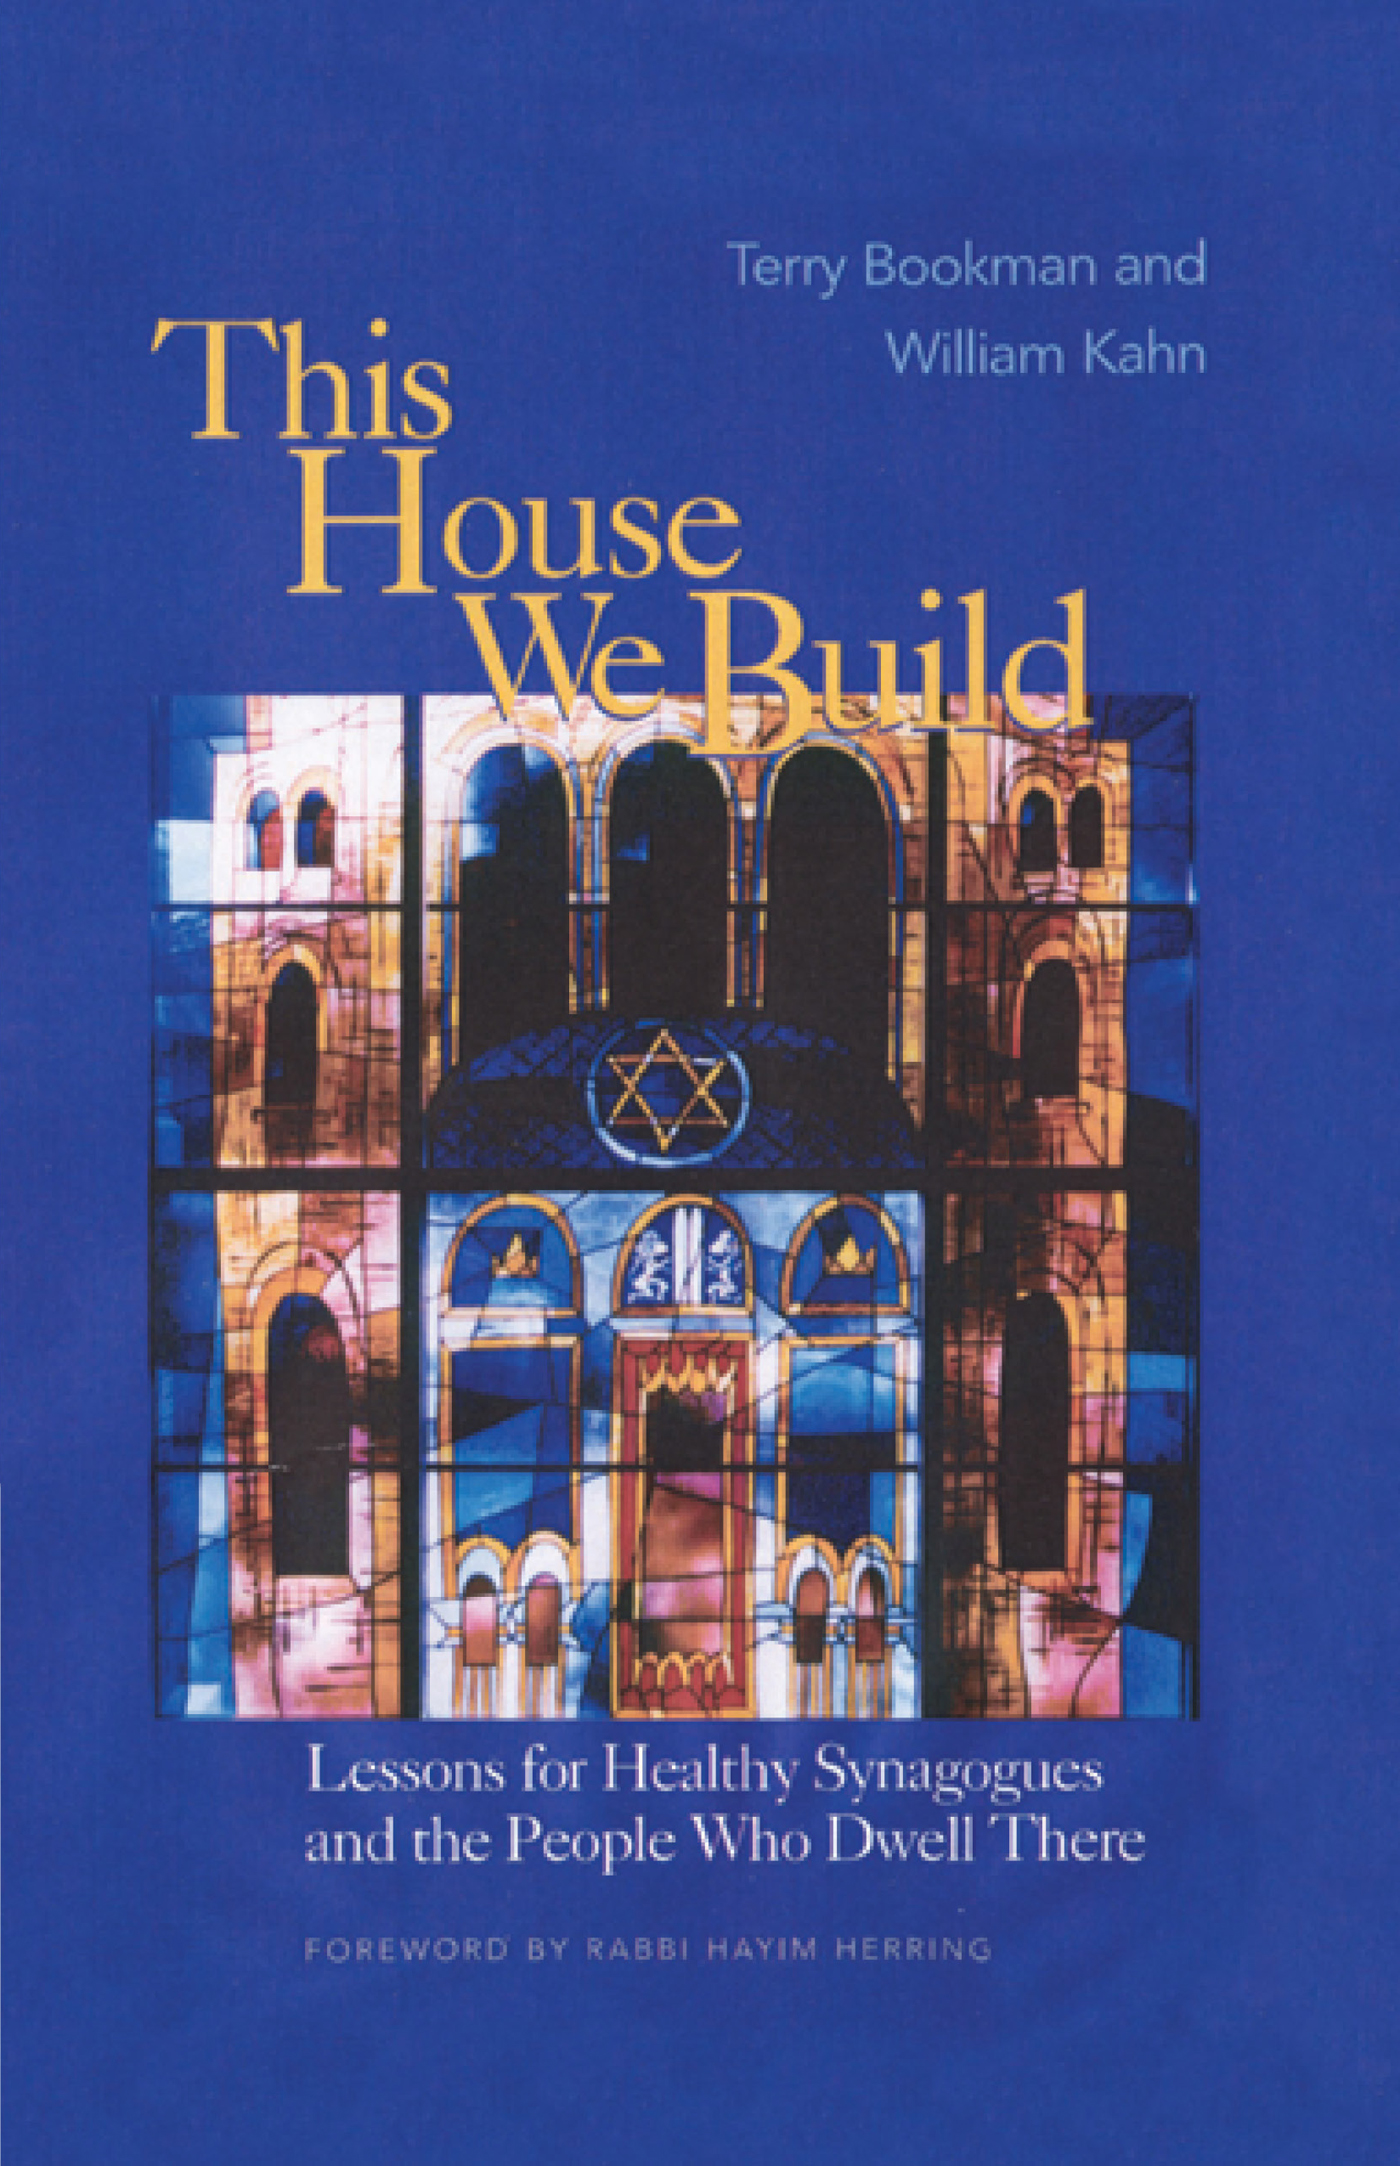 This House We Build: Lessons for Healthy Synagogues and the People Who Dwell There